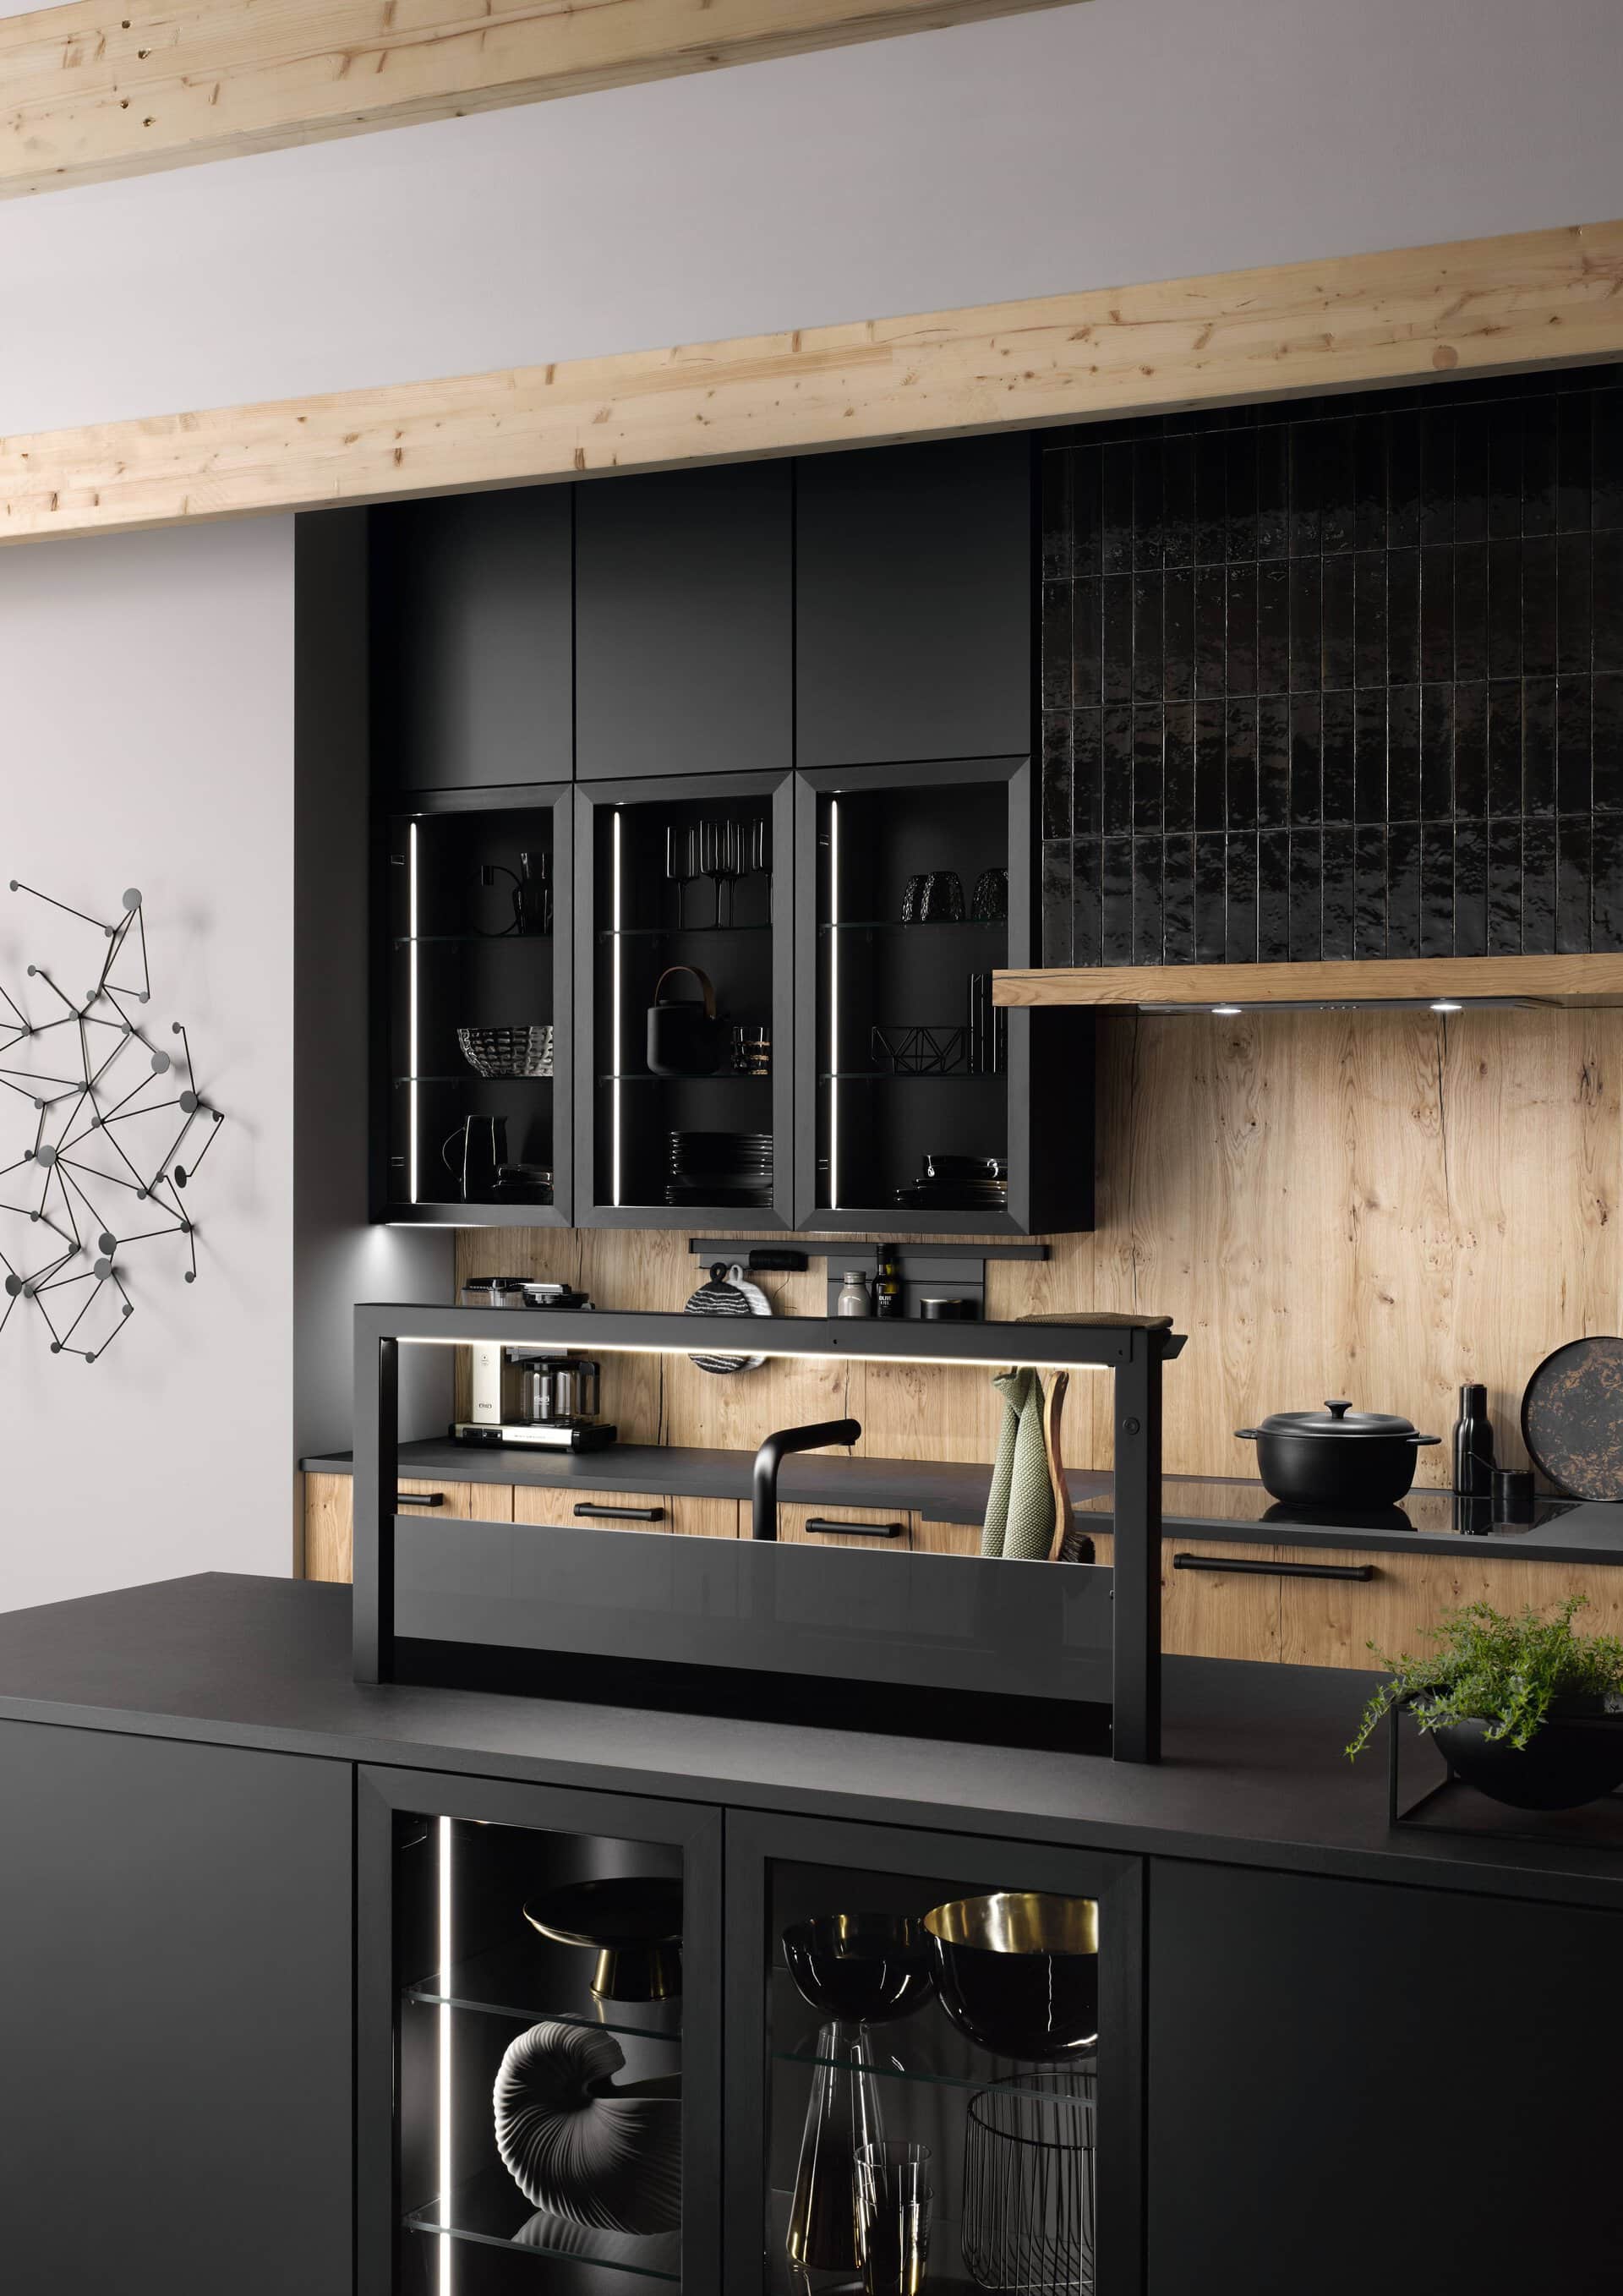 A modern kitchen with black cabinet design and wooden accents.